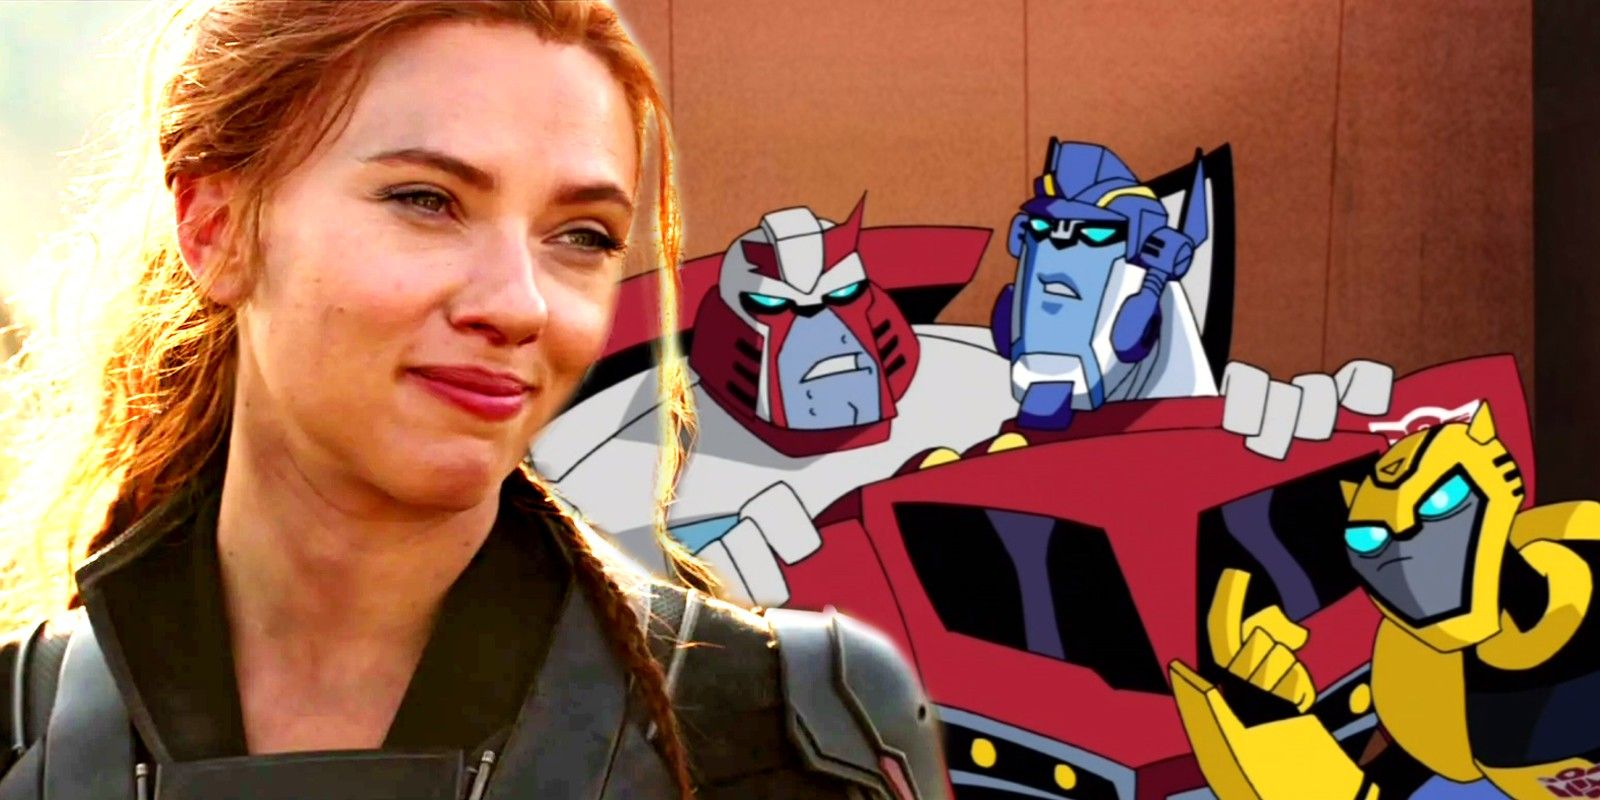 Blended image of Black Widow smiling while Optimus Prime is circled by Bumblebee in Transformers animated show